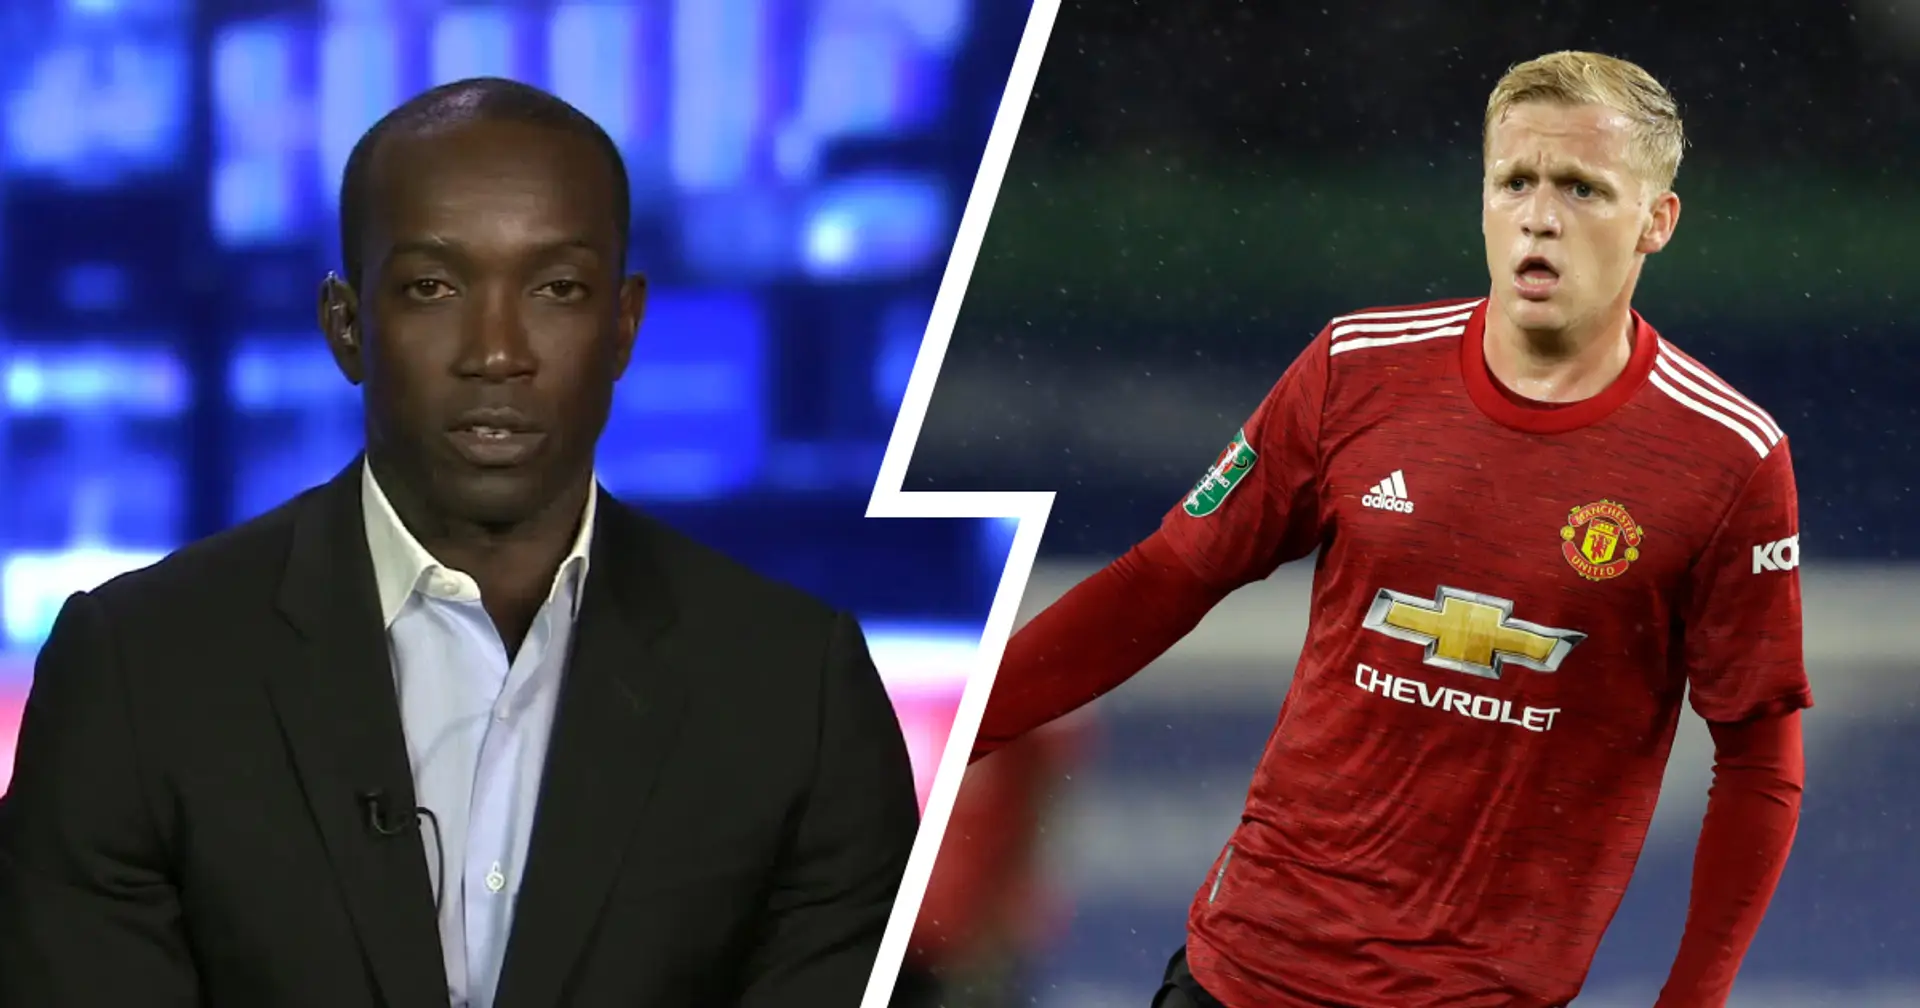 Dwight Yorke: 'Van de Beek has got to be frustrated and I can understand why'